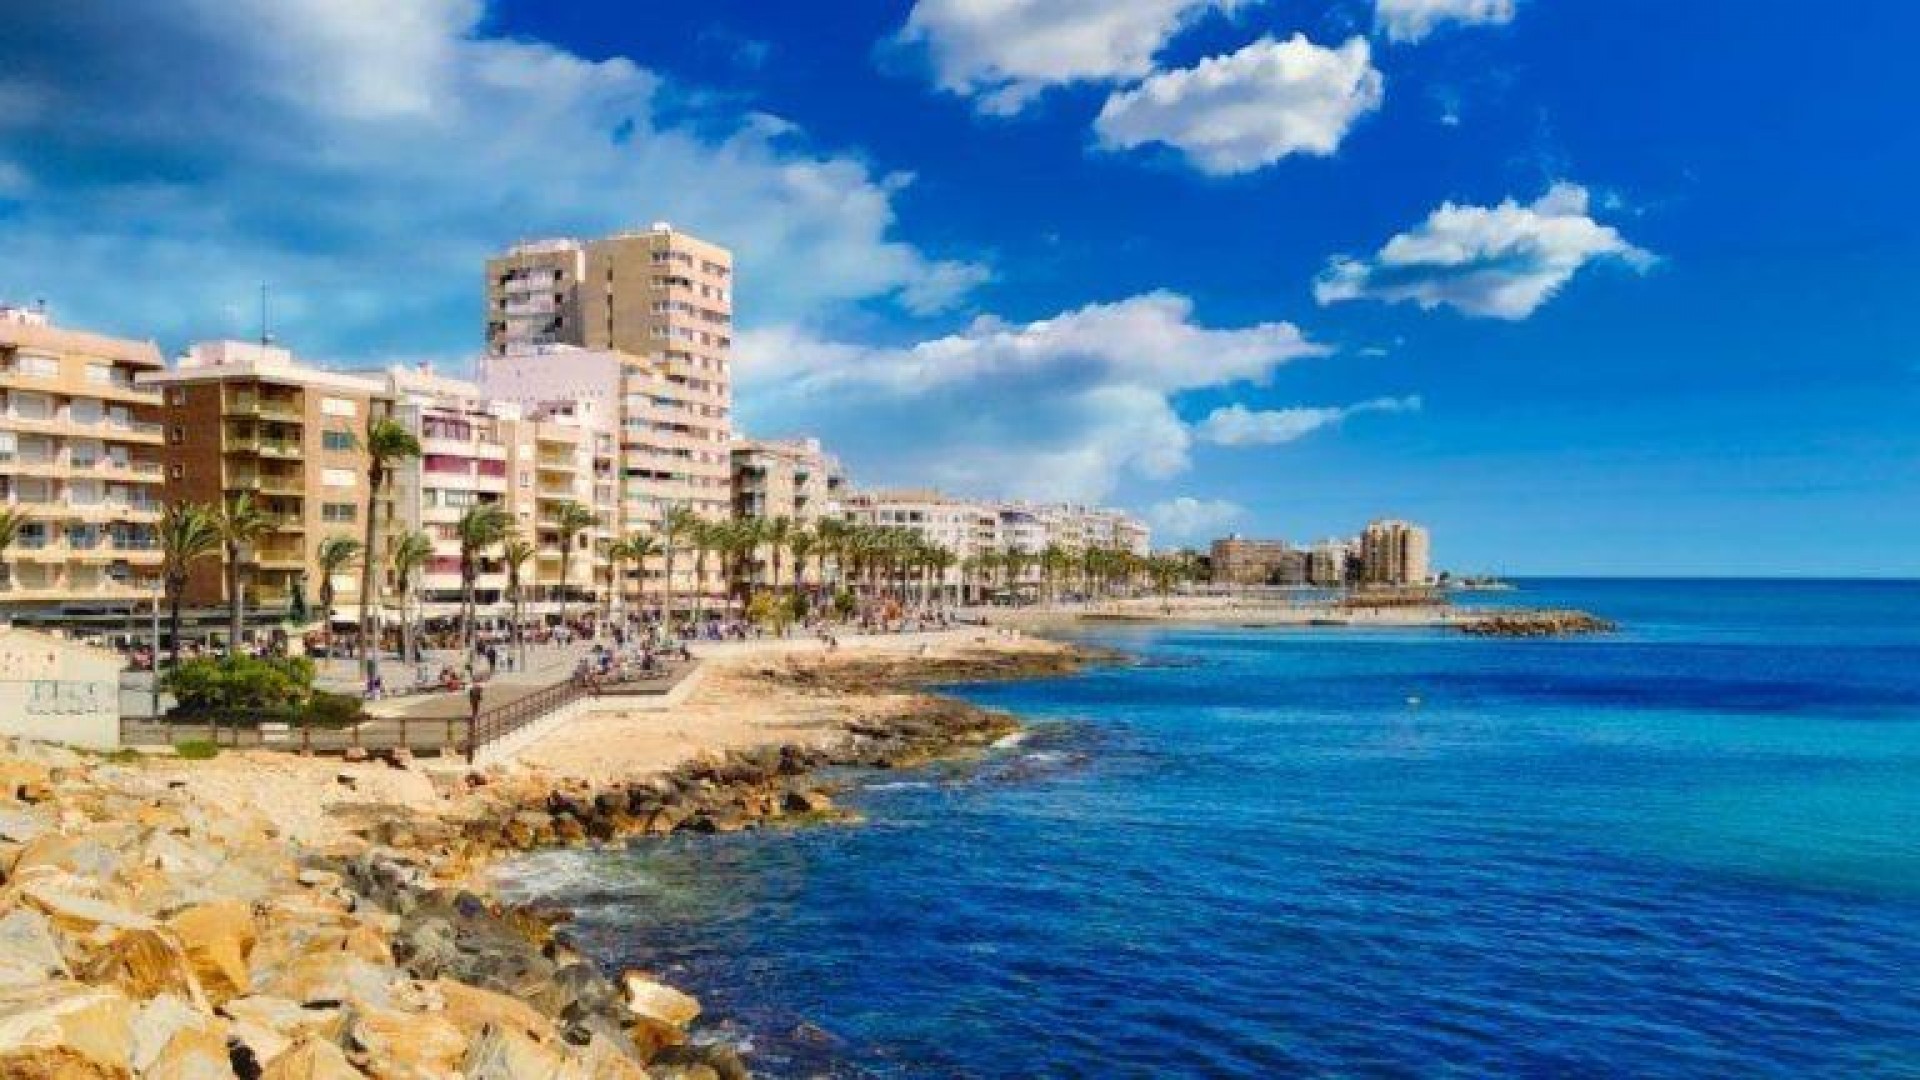 New apartments and penthouses with modern design in Torrevieja, 1/2 bedroom, 1/2 bathroom, large shared solarium, open plan kitchen and living room